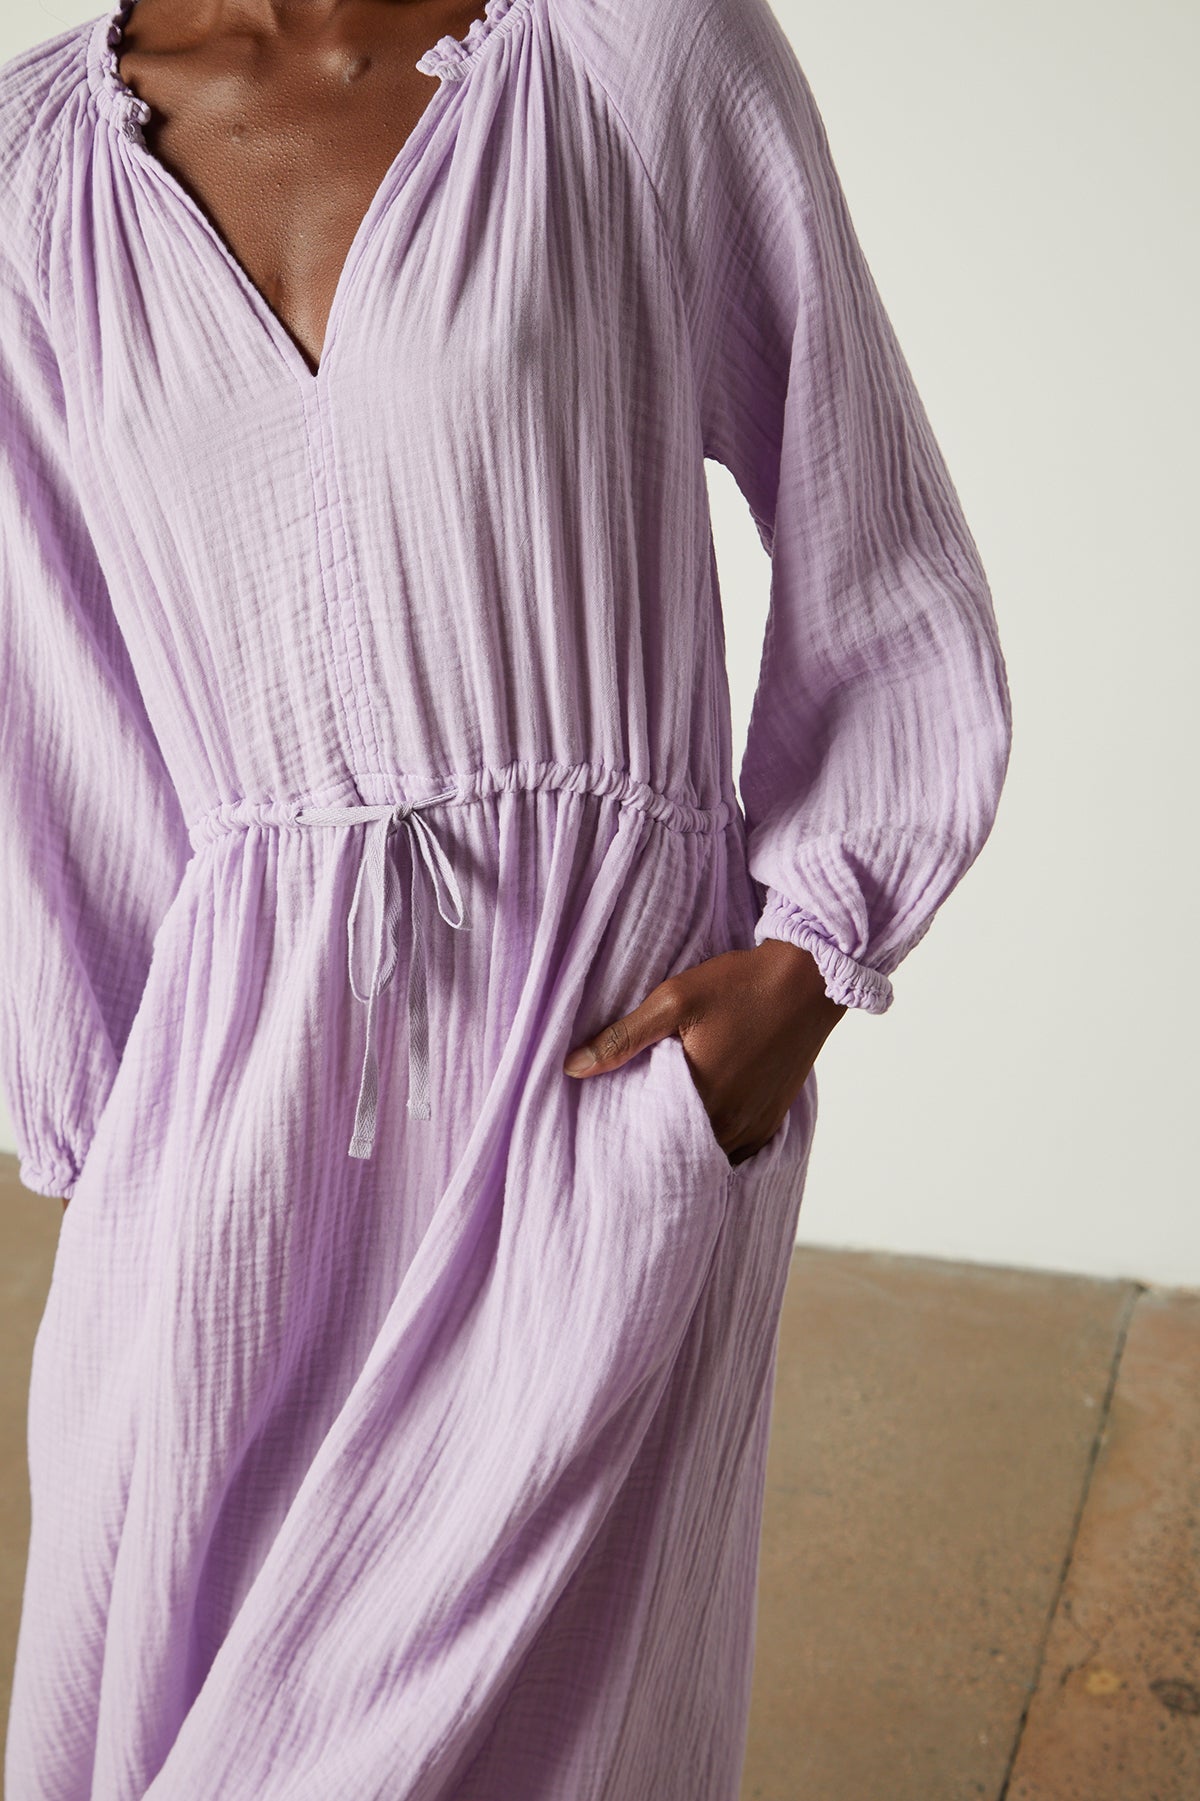 Front detail of Audrey cotton gauze dress in light lavender thistle color with model's hand in pocket-26078934008001